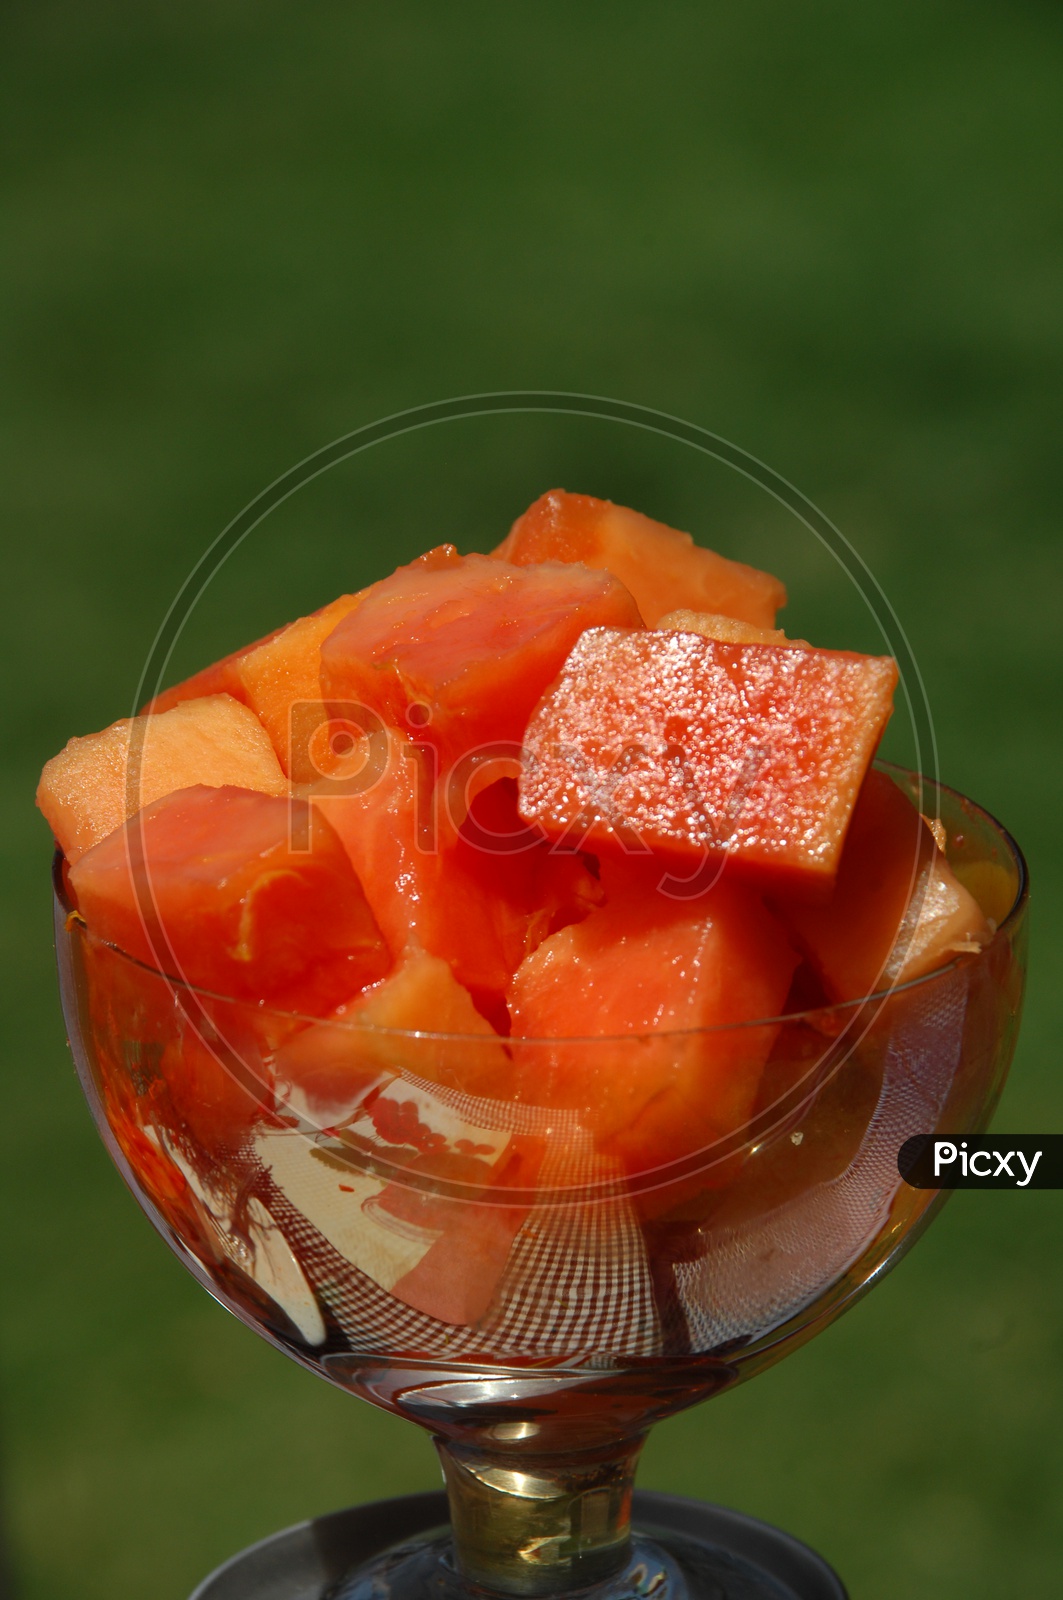 Papaya fruit pieces in a glass cup